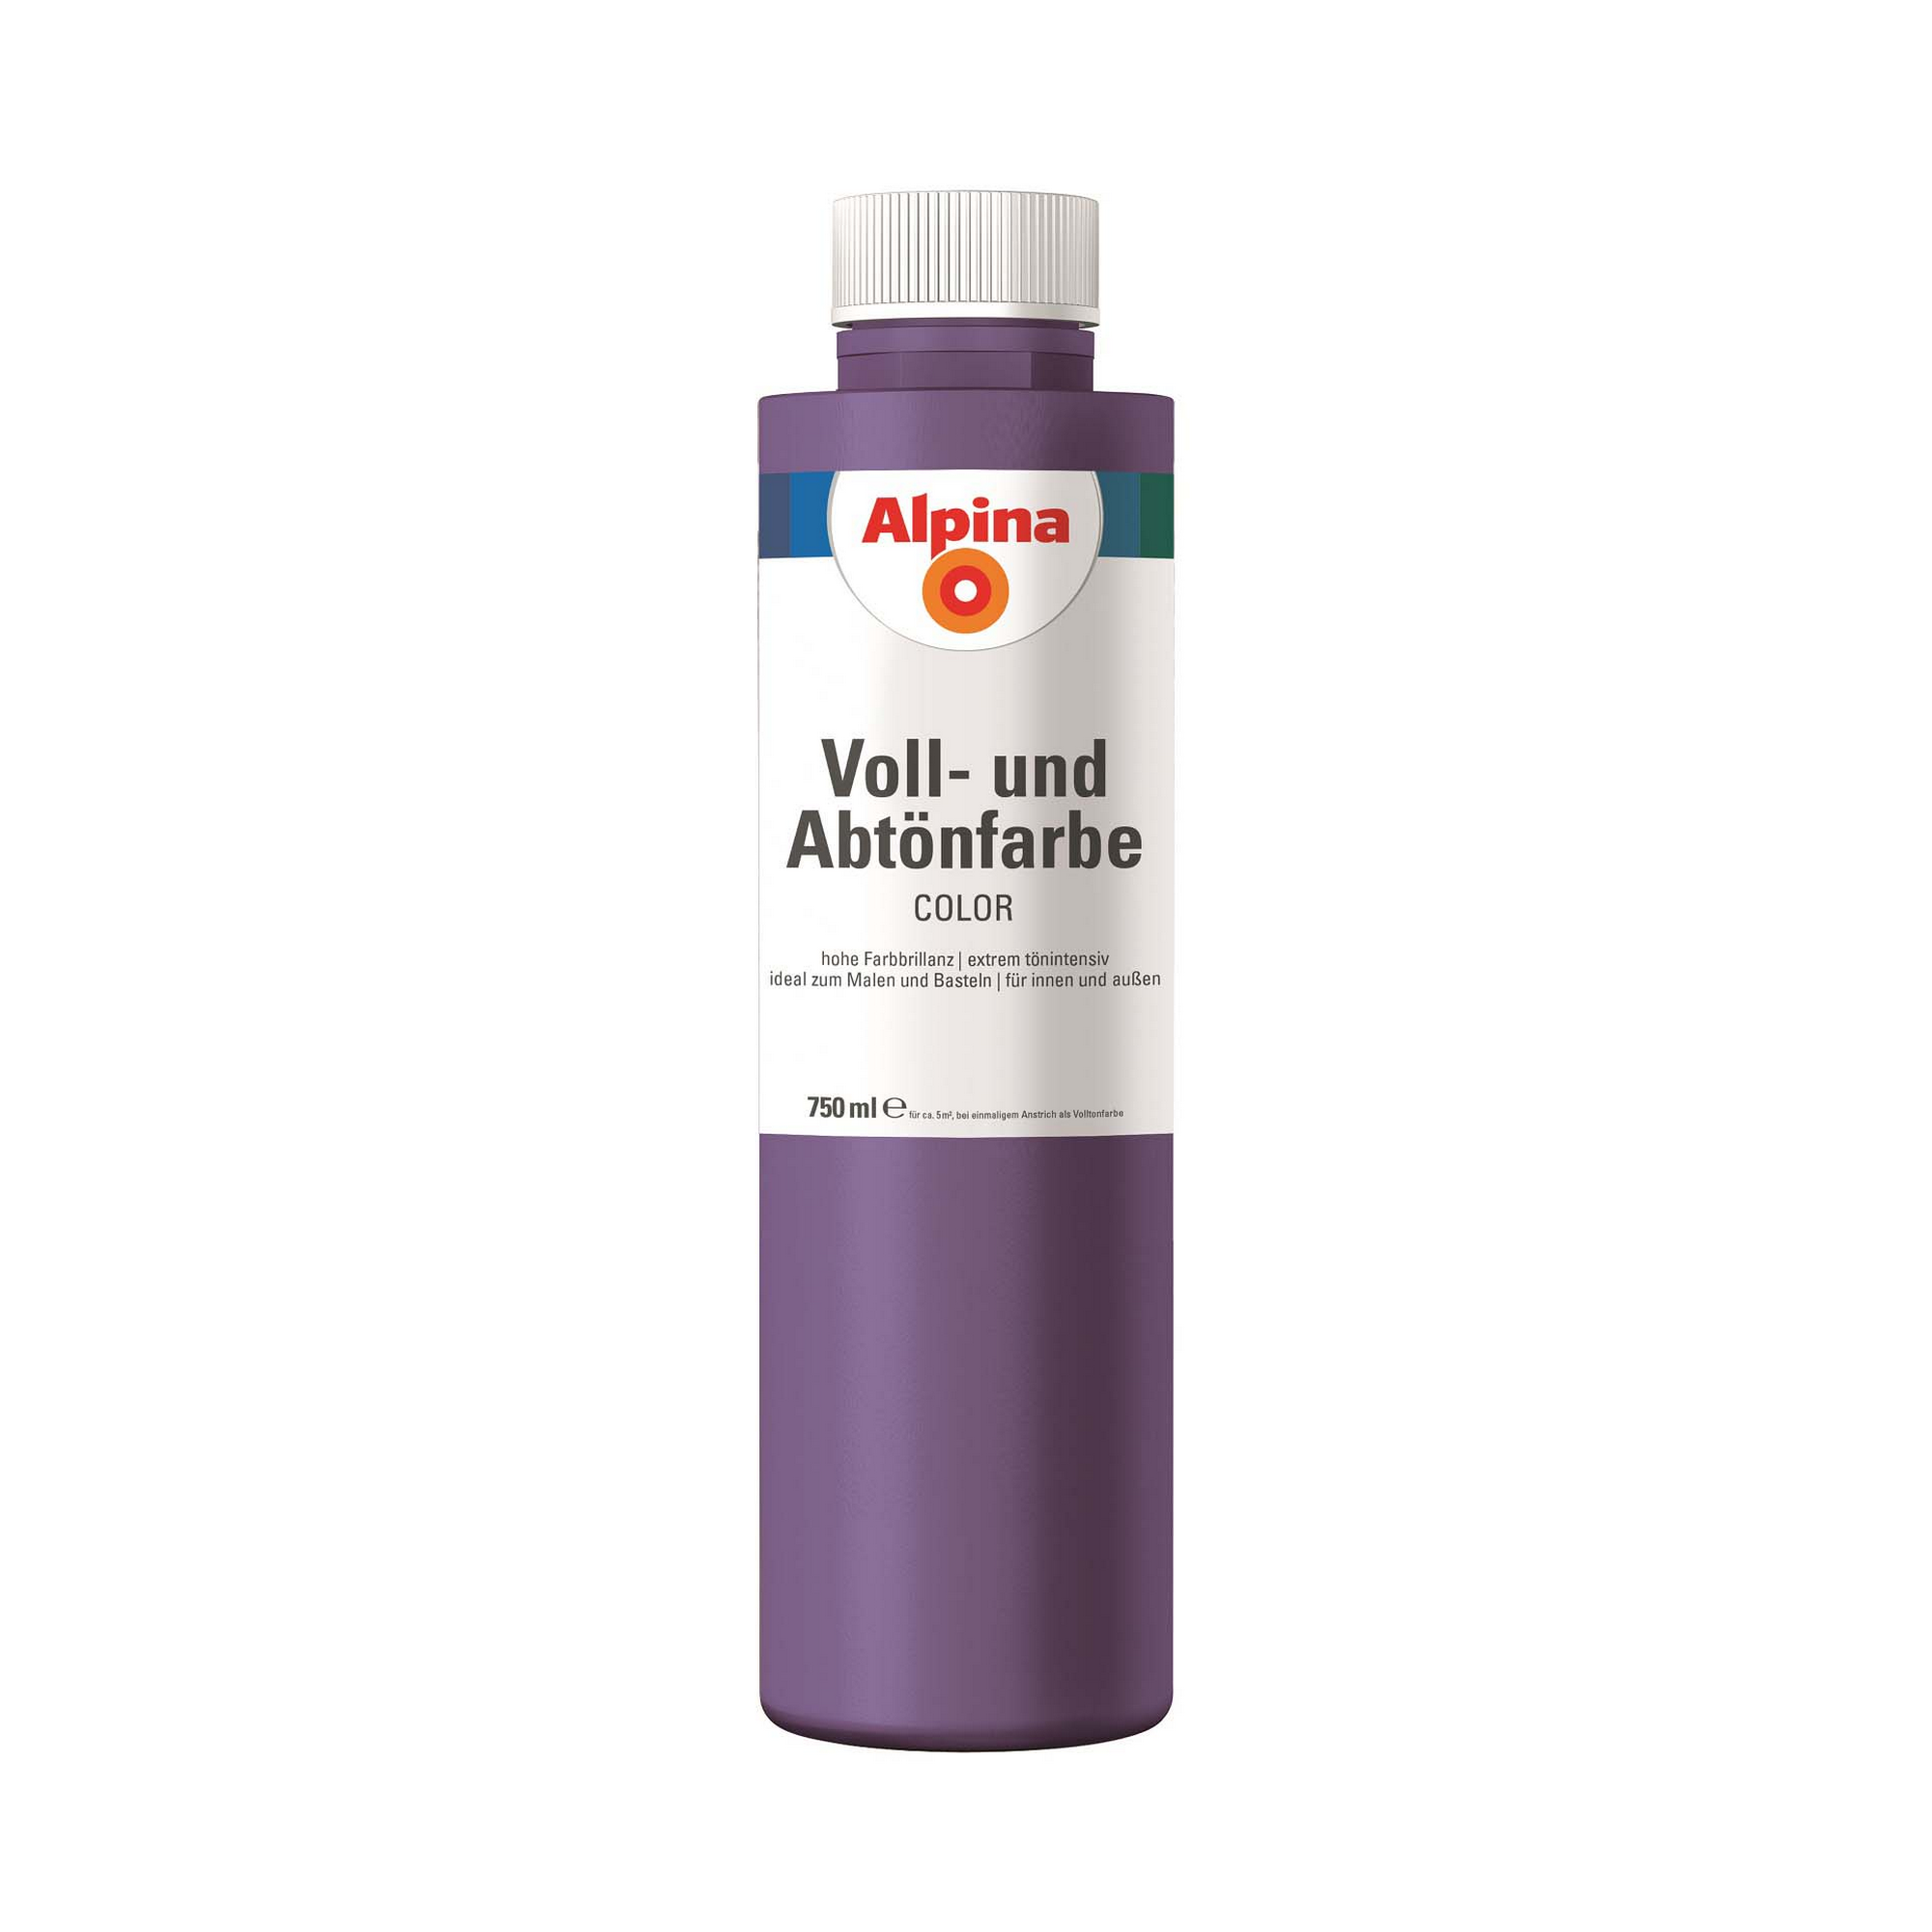 Voll- und Abtönfarbe 'Sweet Violet' lila 750 ml + product picture